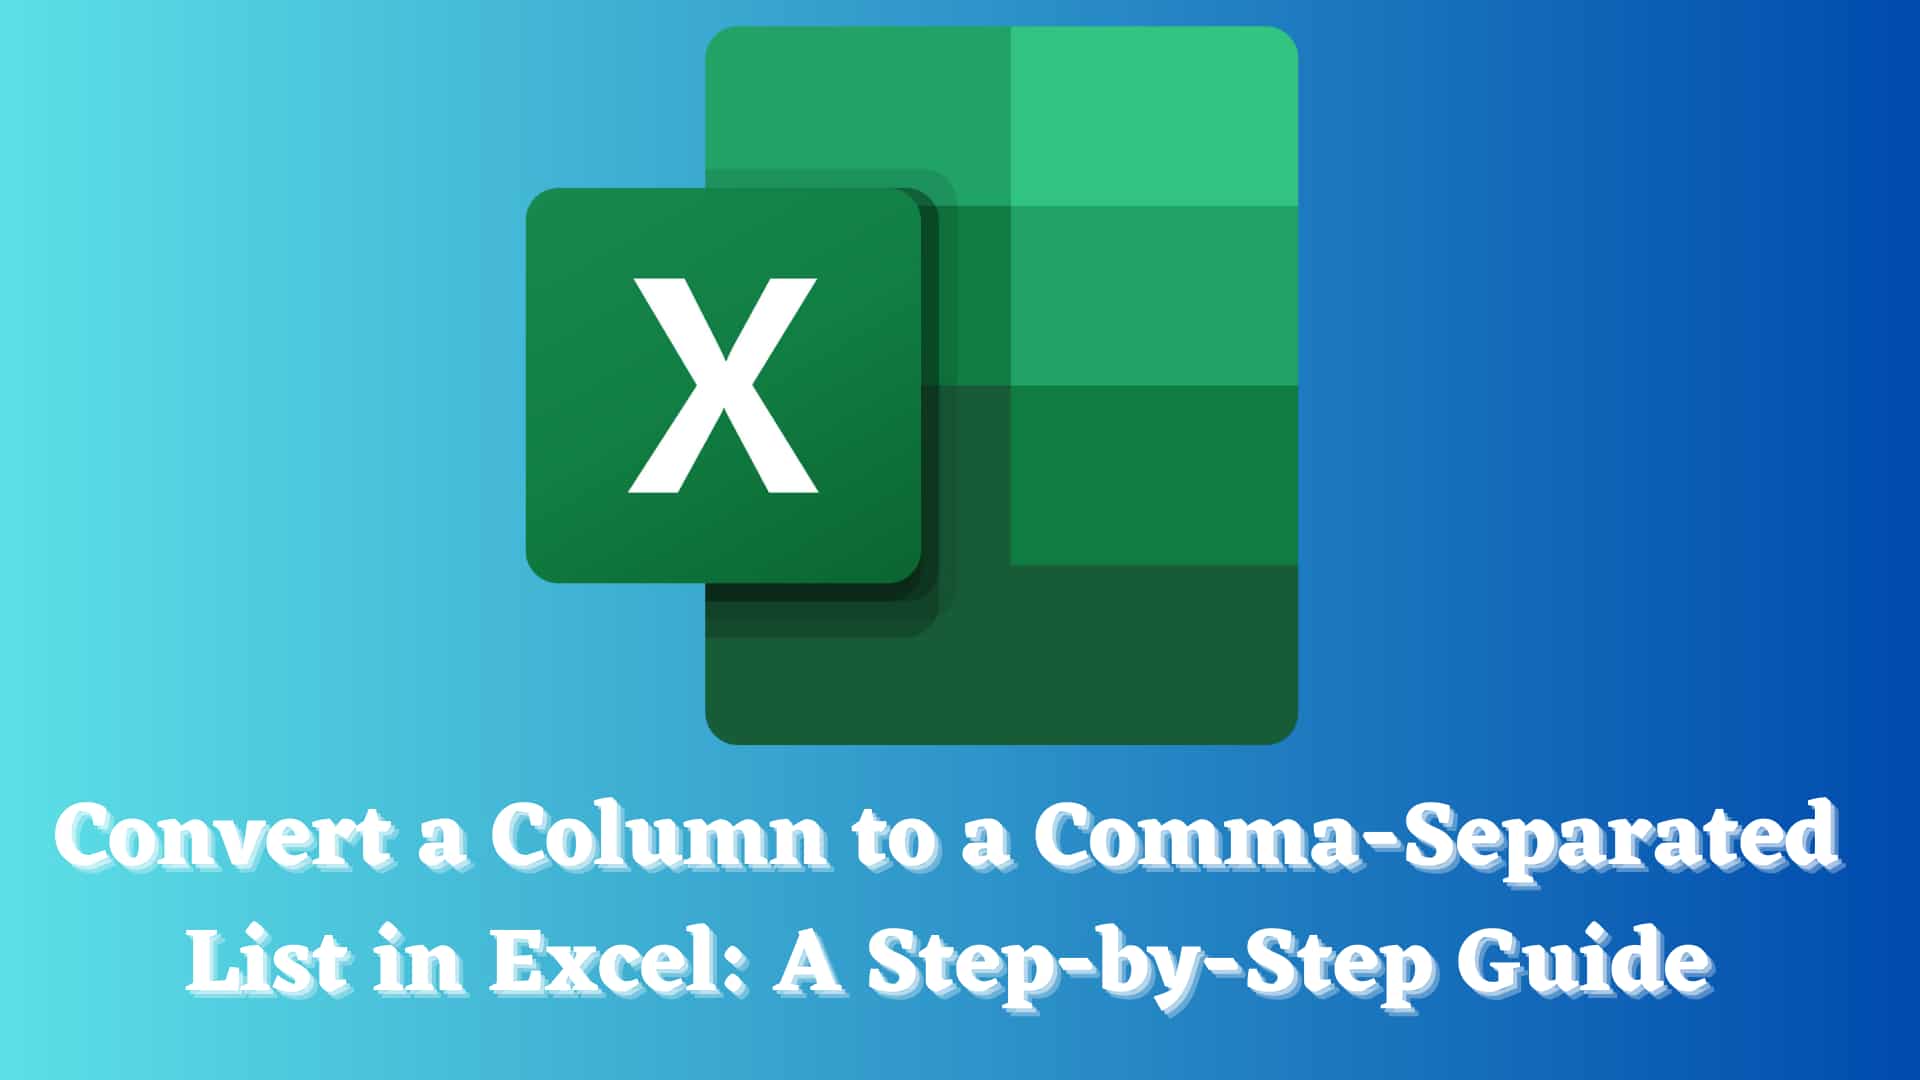 convert-a-column-to-a-comma-separated-list-in-excel-a-step-by-step-guide